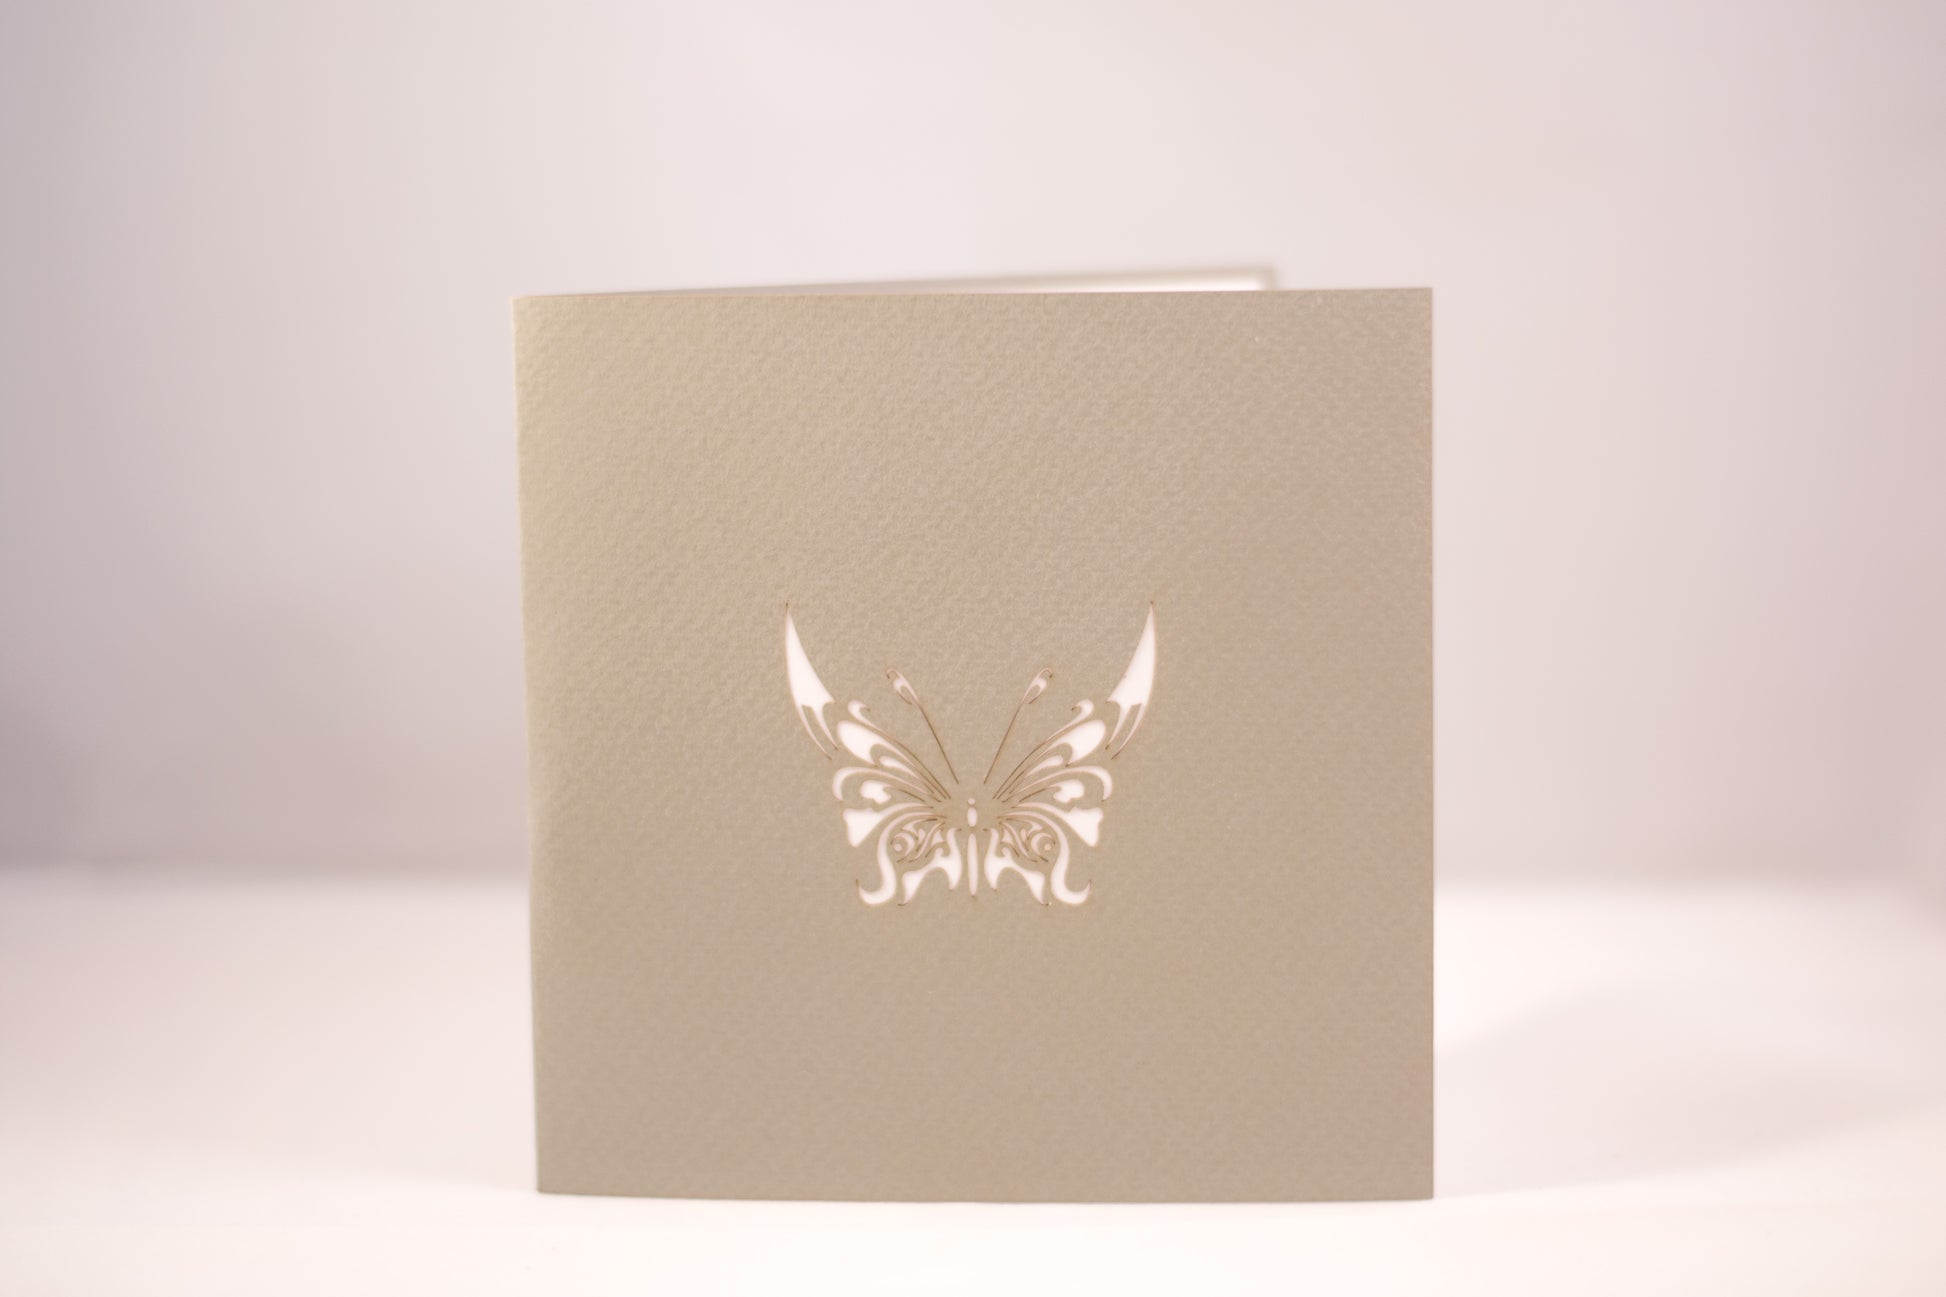 Grey card with butterfly etched in white into front cover